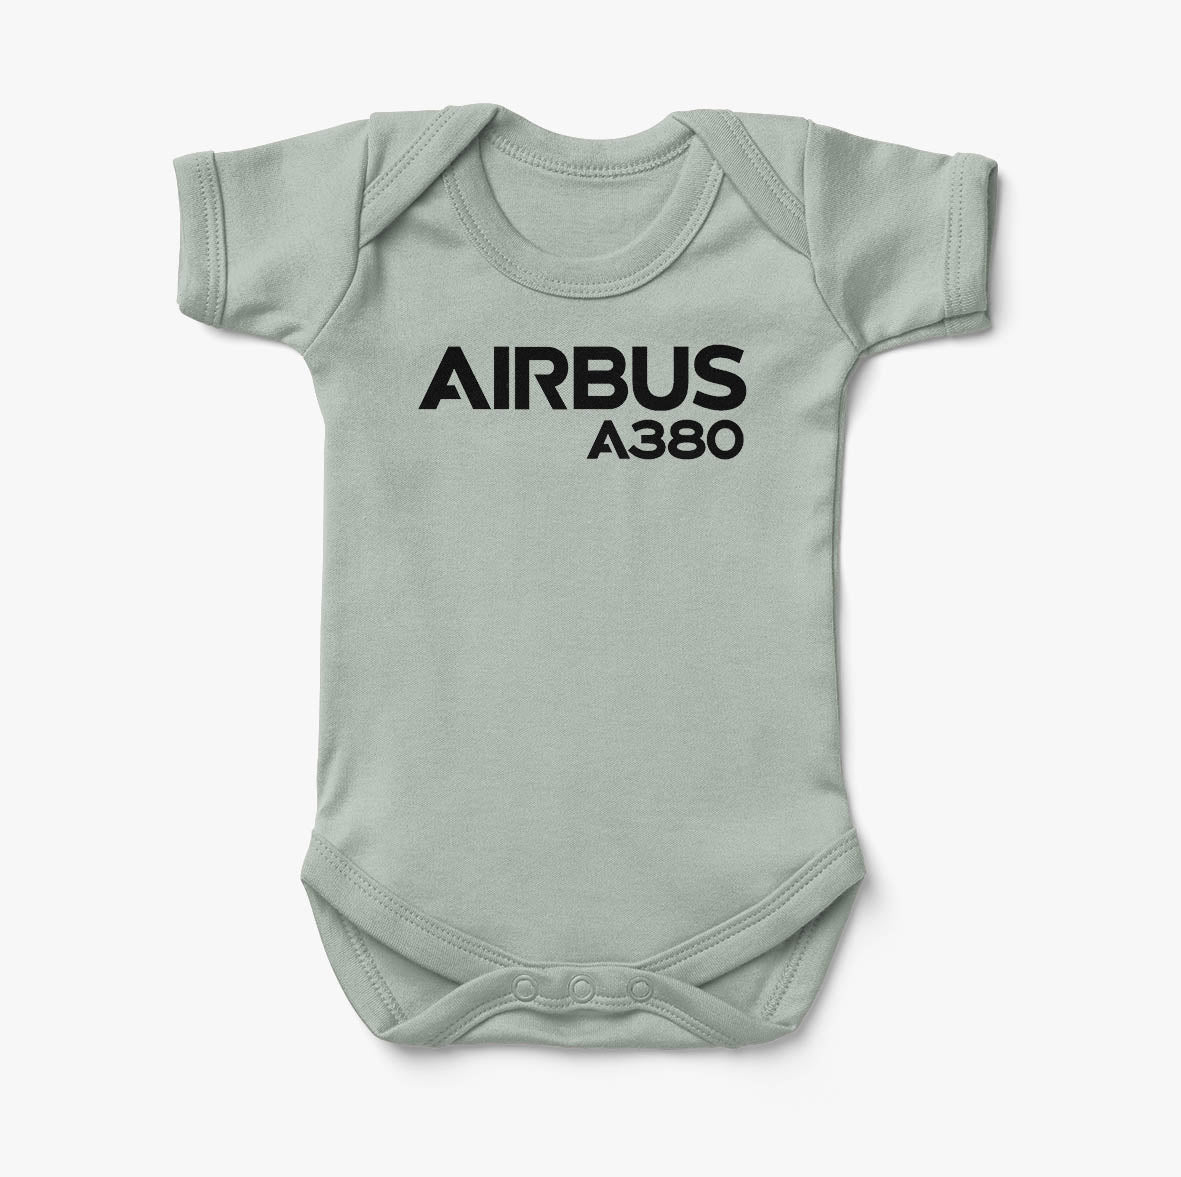 Airbus A380 & Text Designed Baby Bodysuits